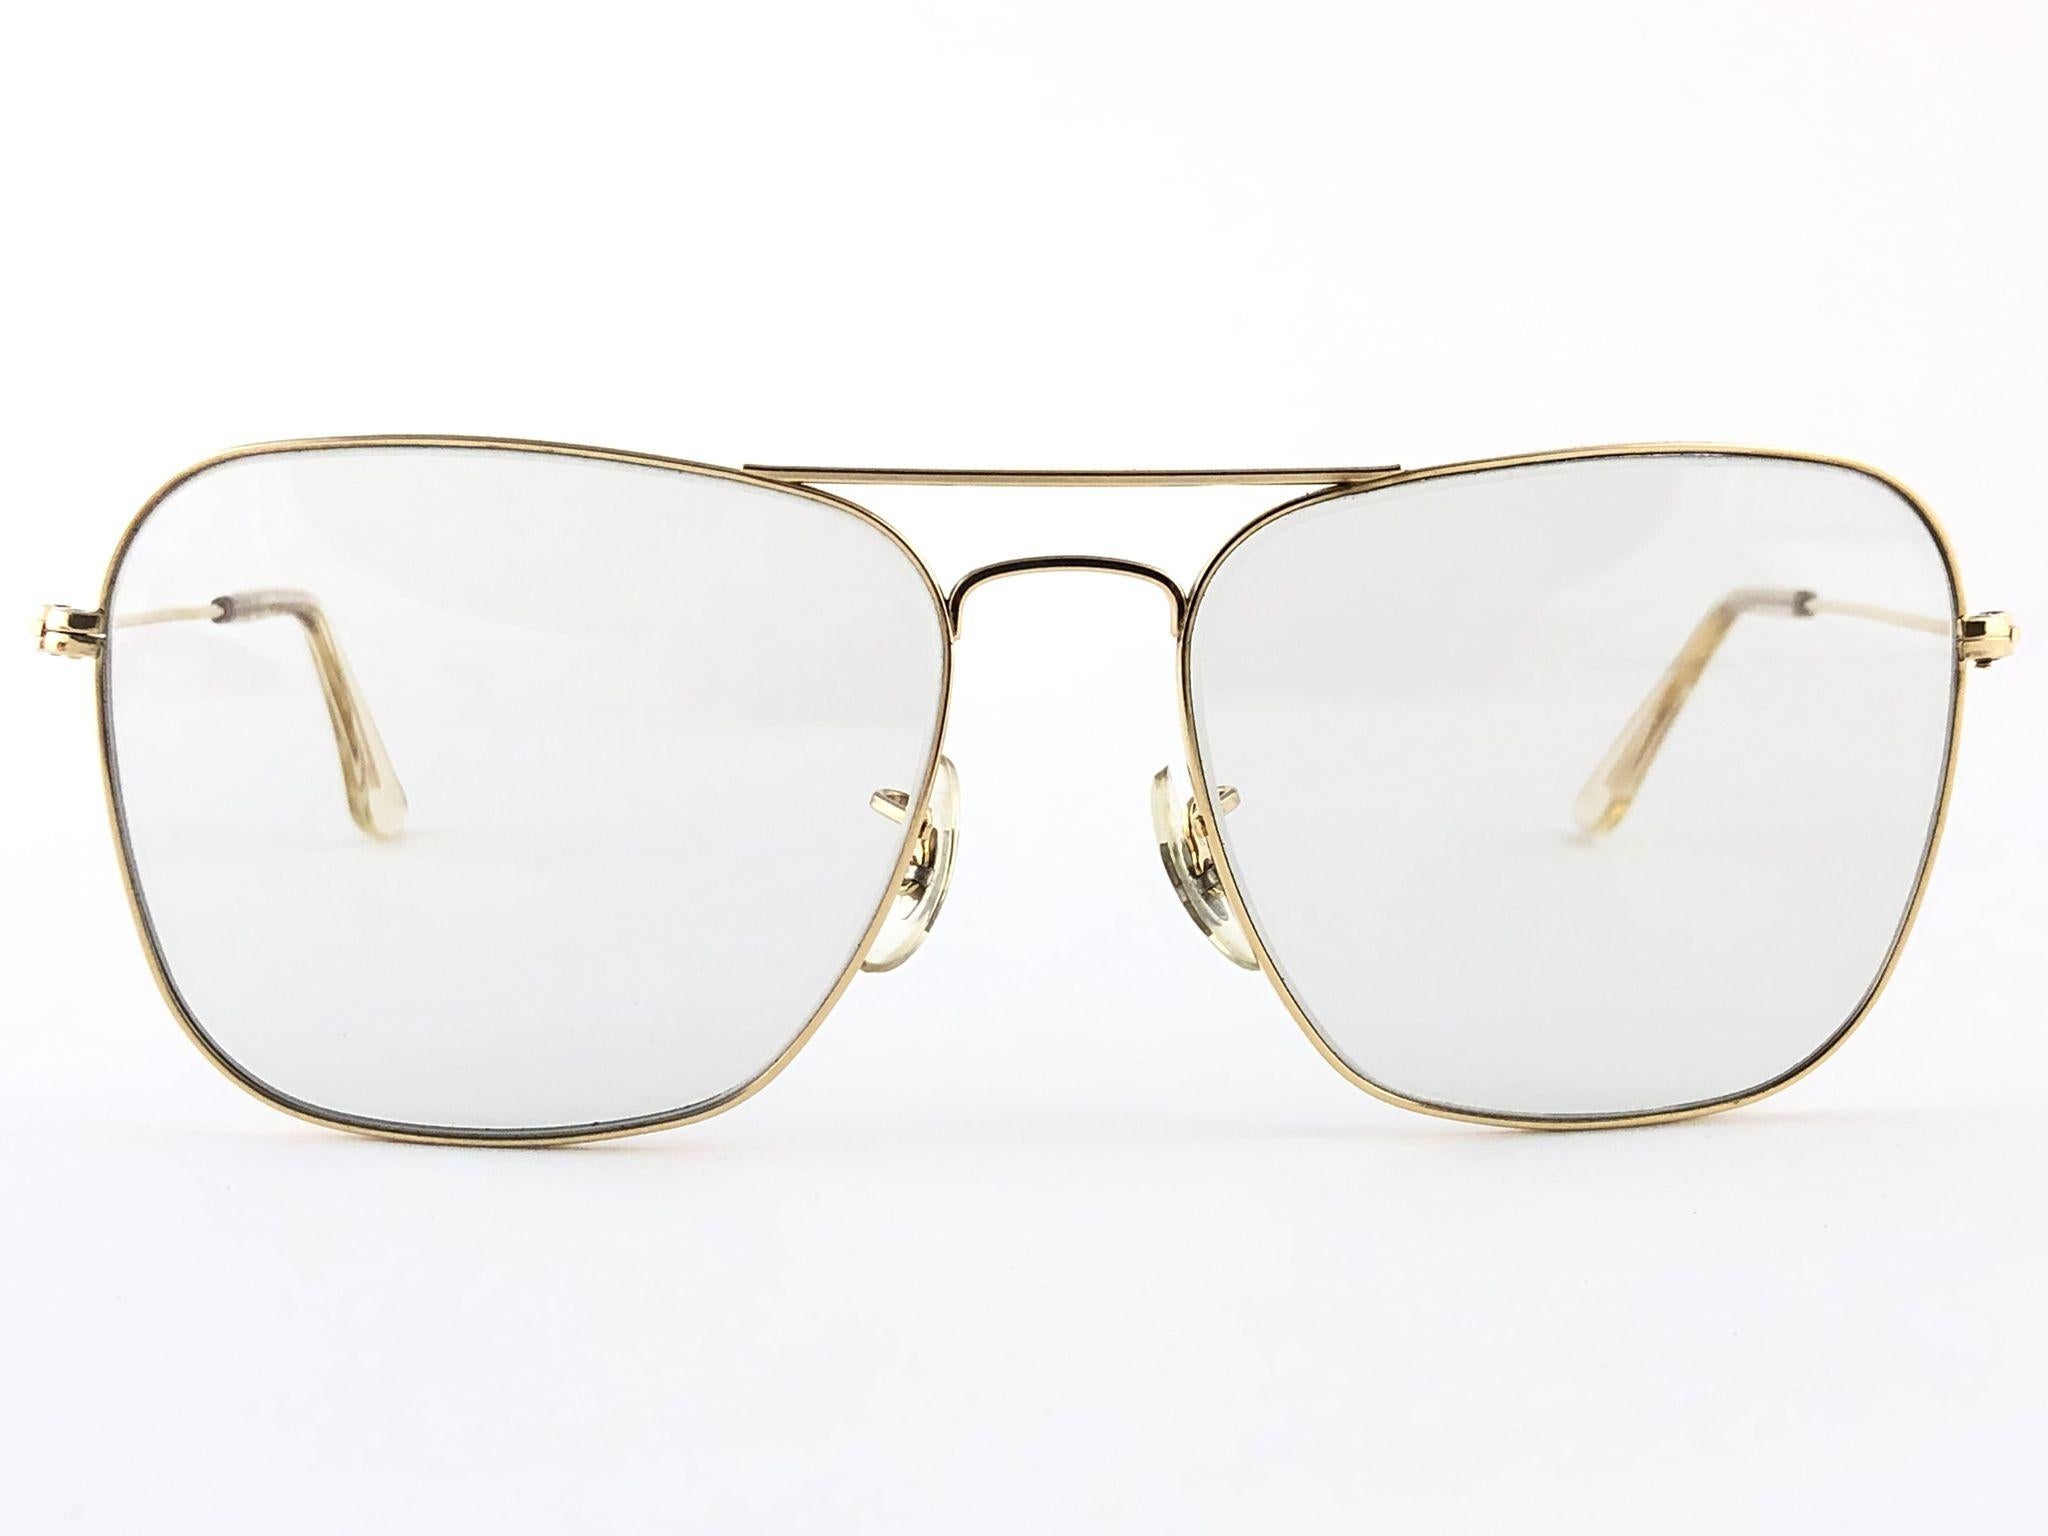 New Vintage Ray Ban Caravan gold plated with changeable lenses. B&L etched on top of the lenses, so mid 1970's.  Please notice this item is nearly 50 years old and may show minor sign of wear due to storage.
Comes with its original Ray Ban B&L case.